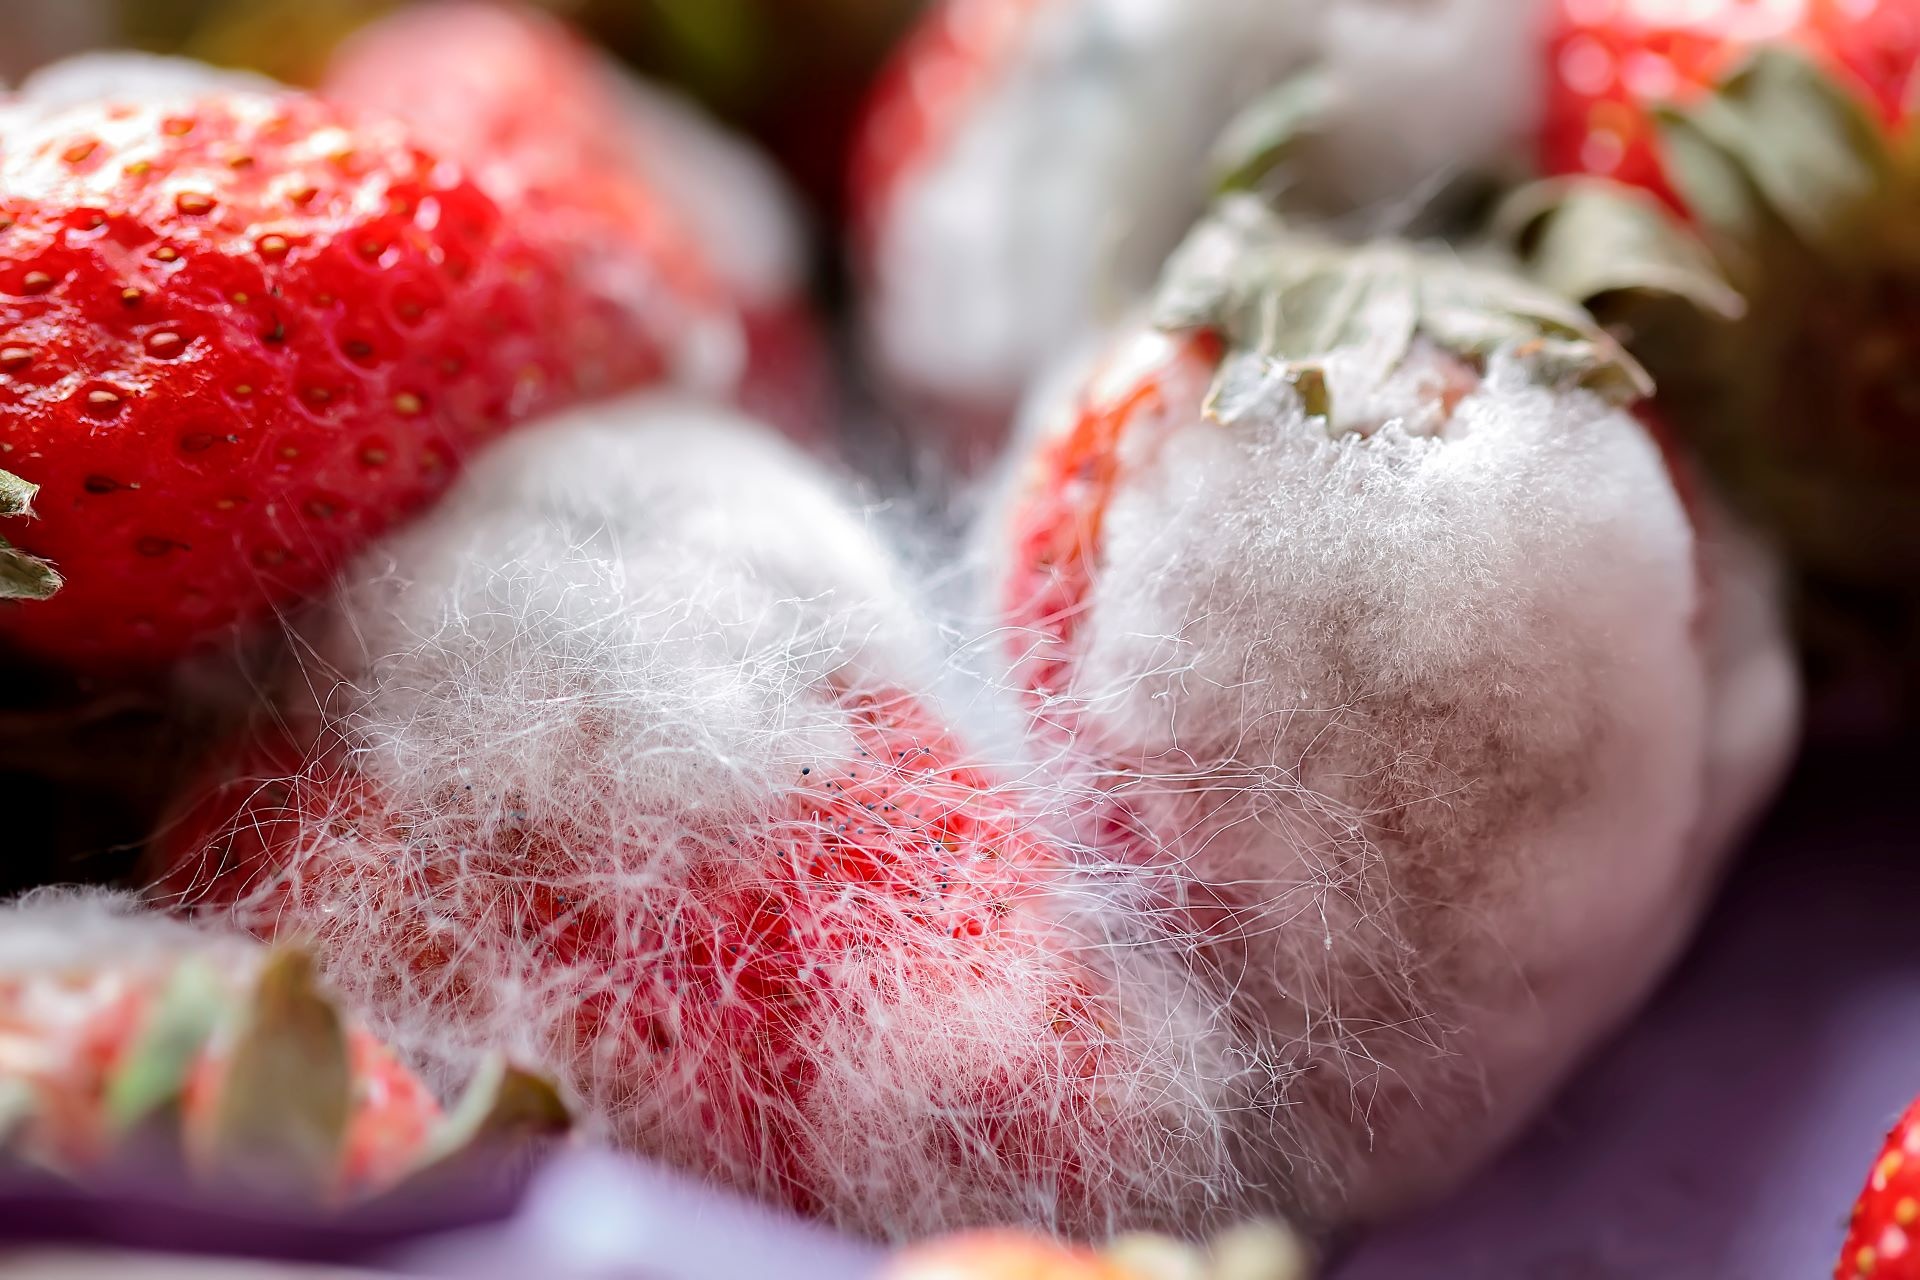 This simple and easy hack will keep your fresh berries from getting moldy:  'They'll last much longer this way